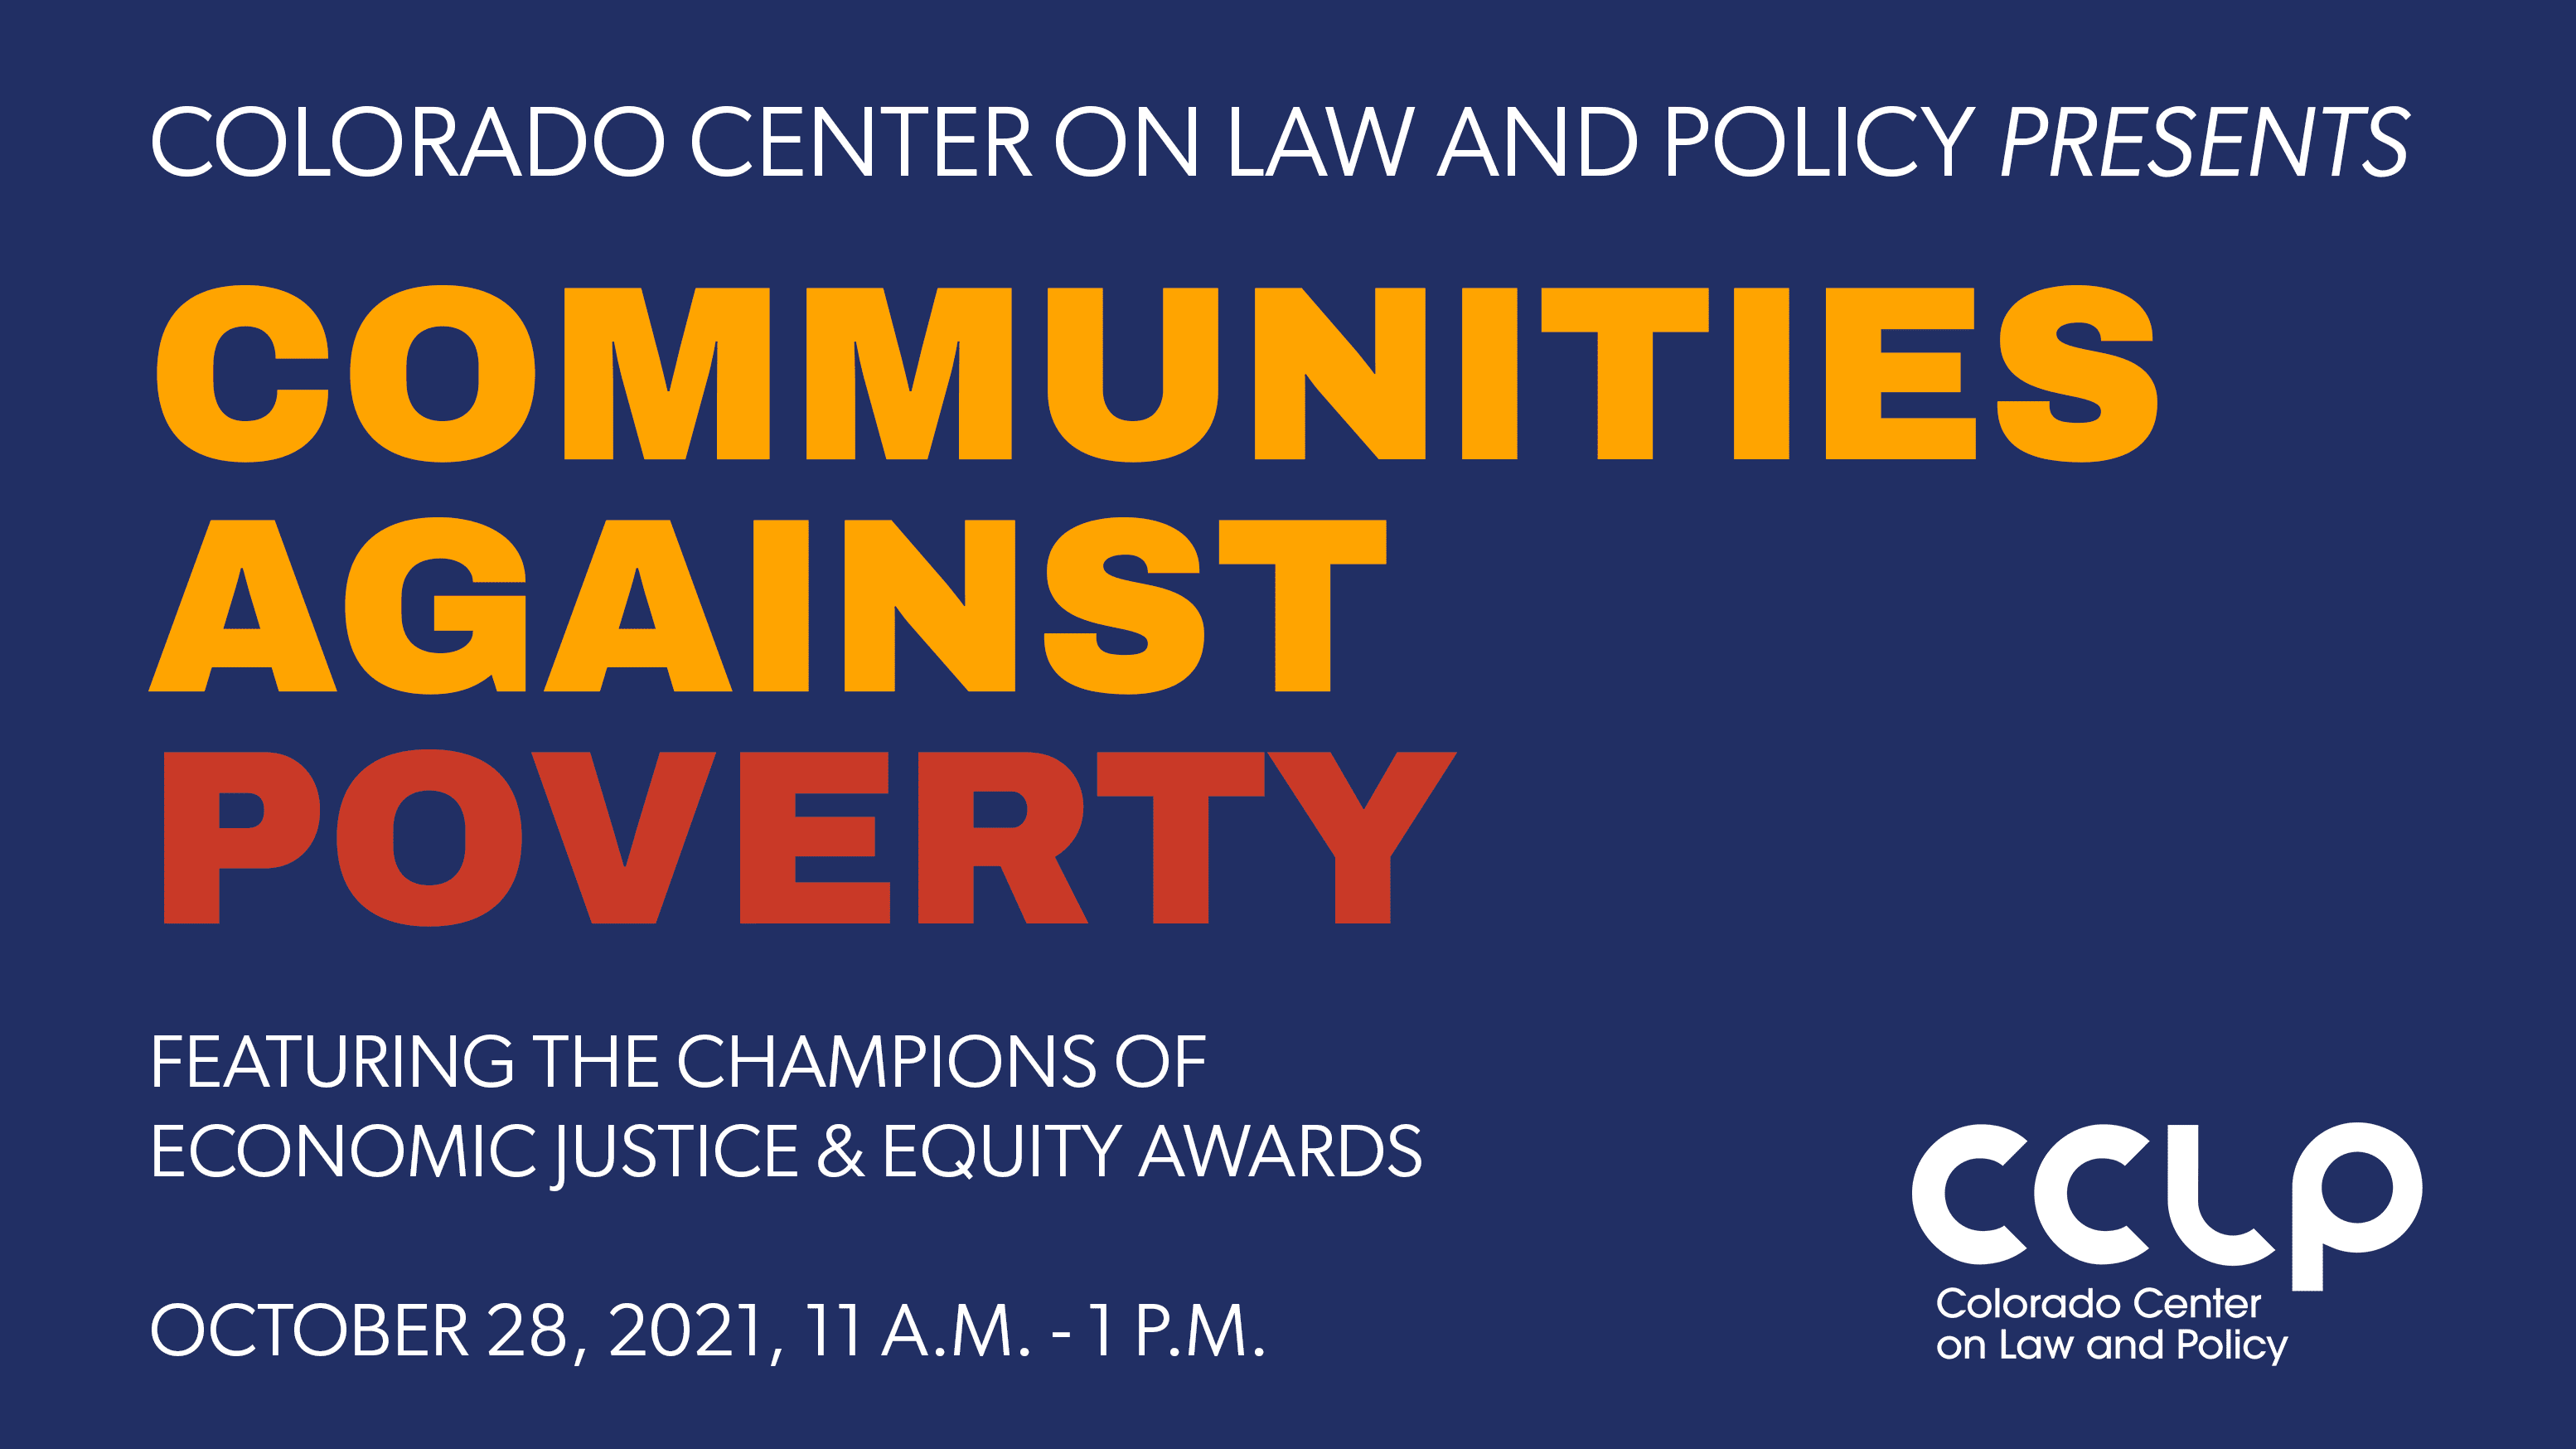 Colorado Center on Law and Policy presents Communities Against Poverty event featuring the Champions of Economic Justice & Equity Awards